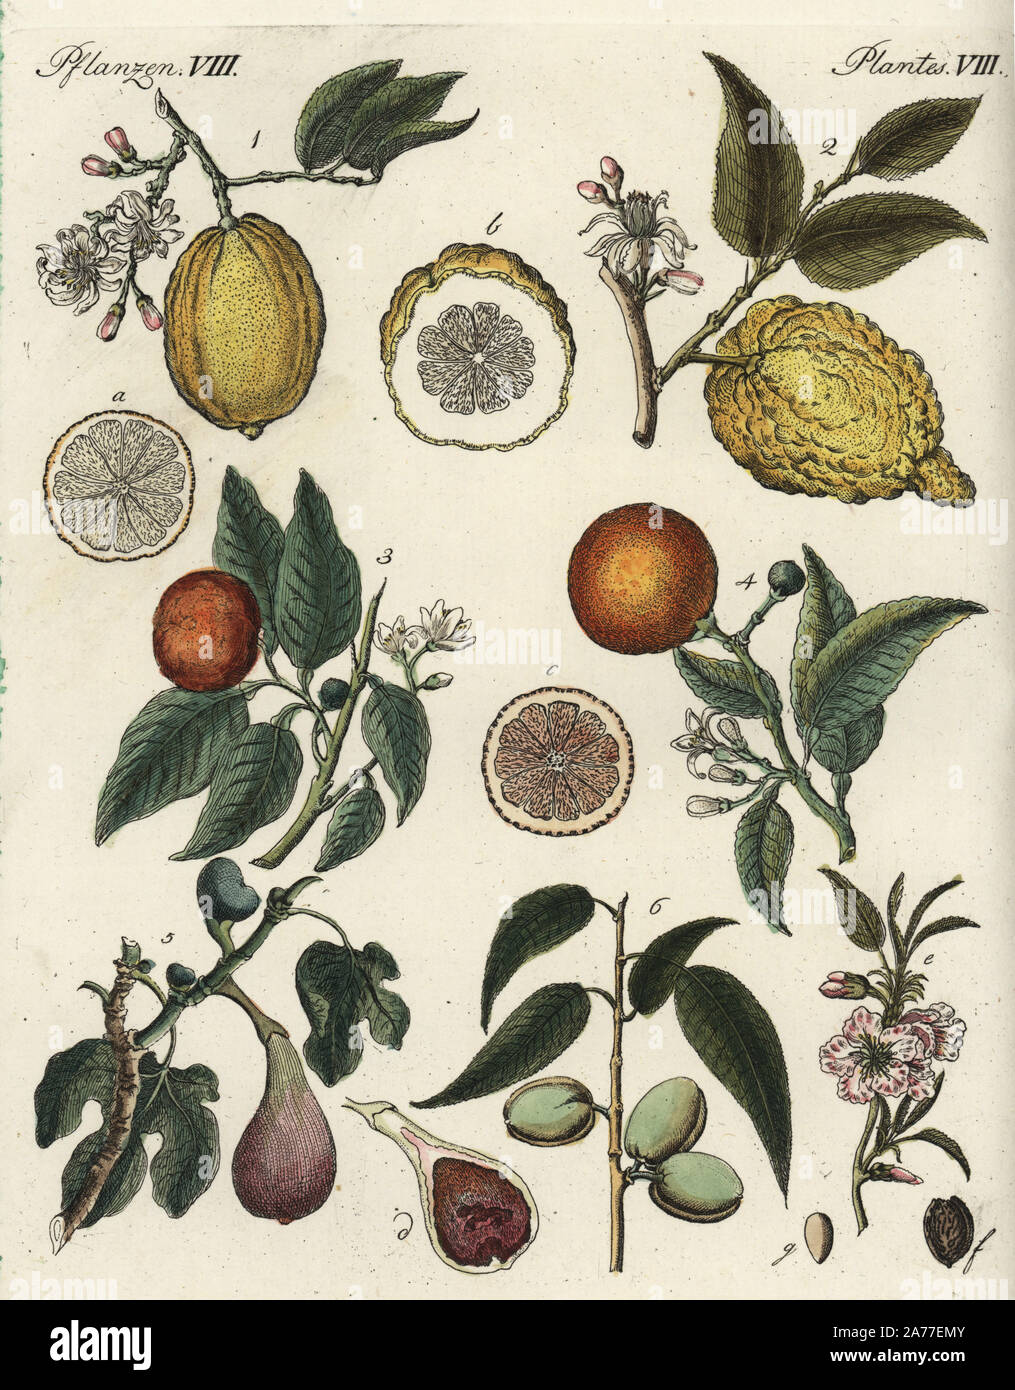 Fruits including citron, Citrus medica 1,2, bitter orange, Citrus aurantium 3, sweet or Chinese orange, Citrus sinensis 4, fig, Ficus carica 5, and almond, Prunus amygdalus 6, with blossom and fruit in section. Handcoloured copperplate engraving from Friedrich Johann Bertuch's Bilderbuch fur Kinder (Picture Book for Children), Weimar, 1792. Stock Photo